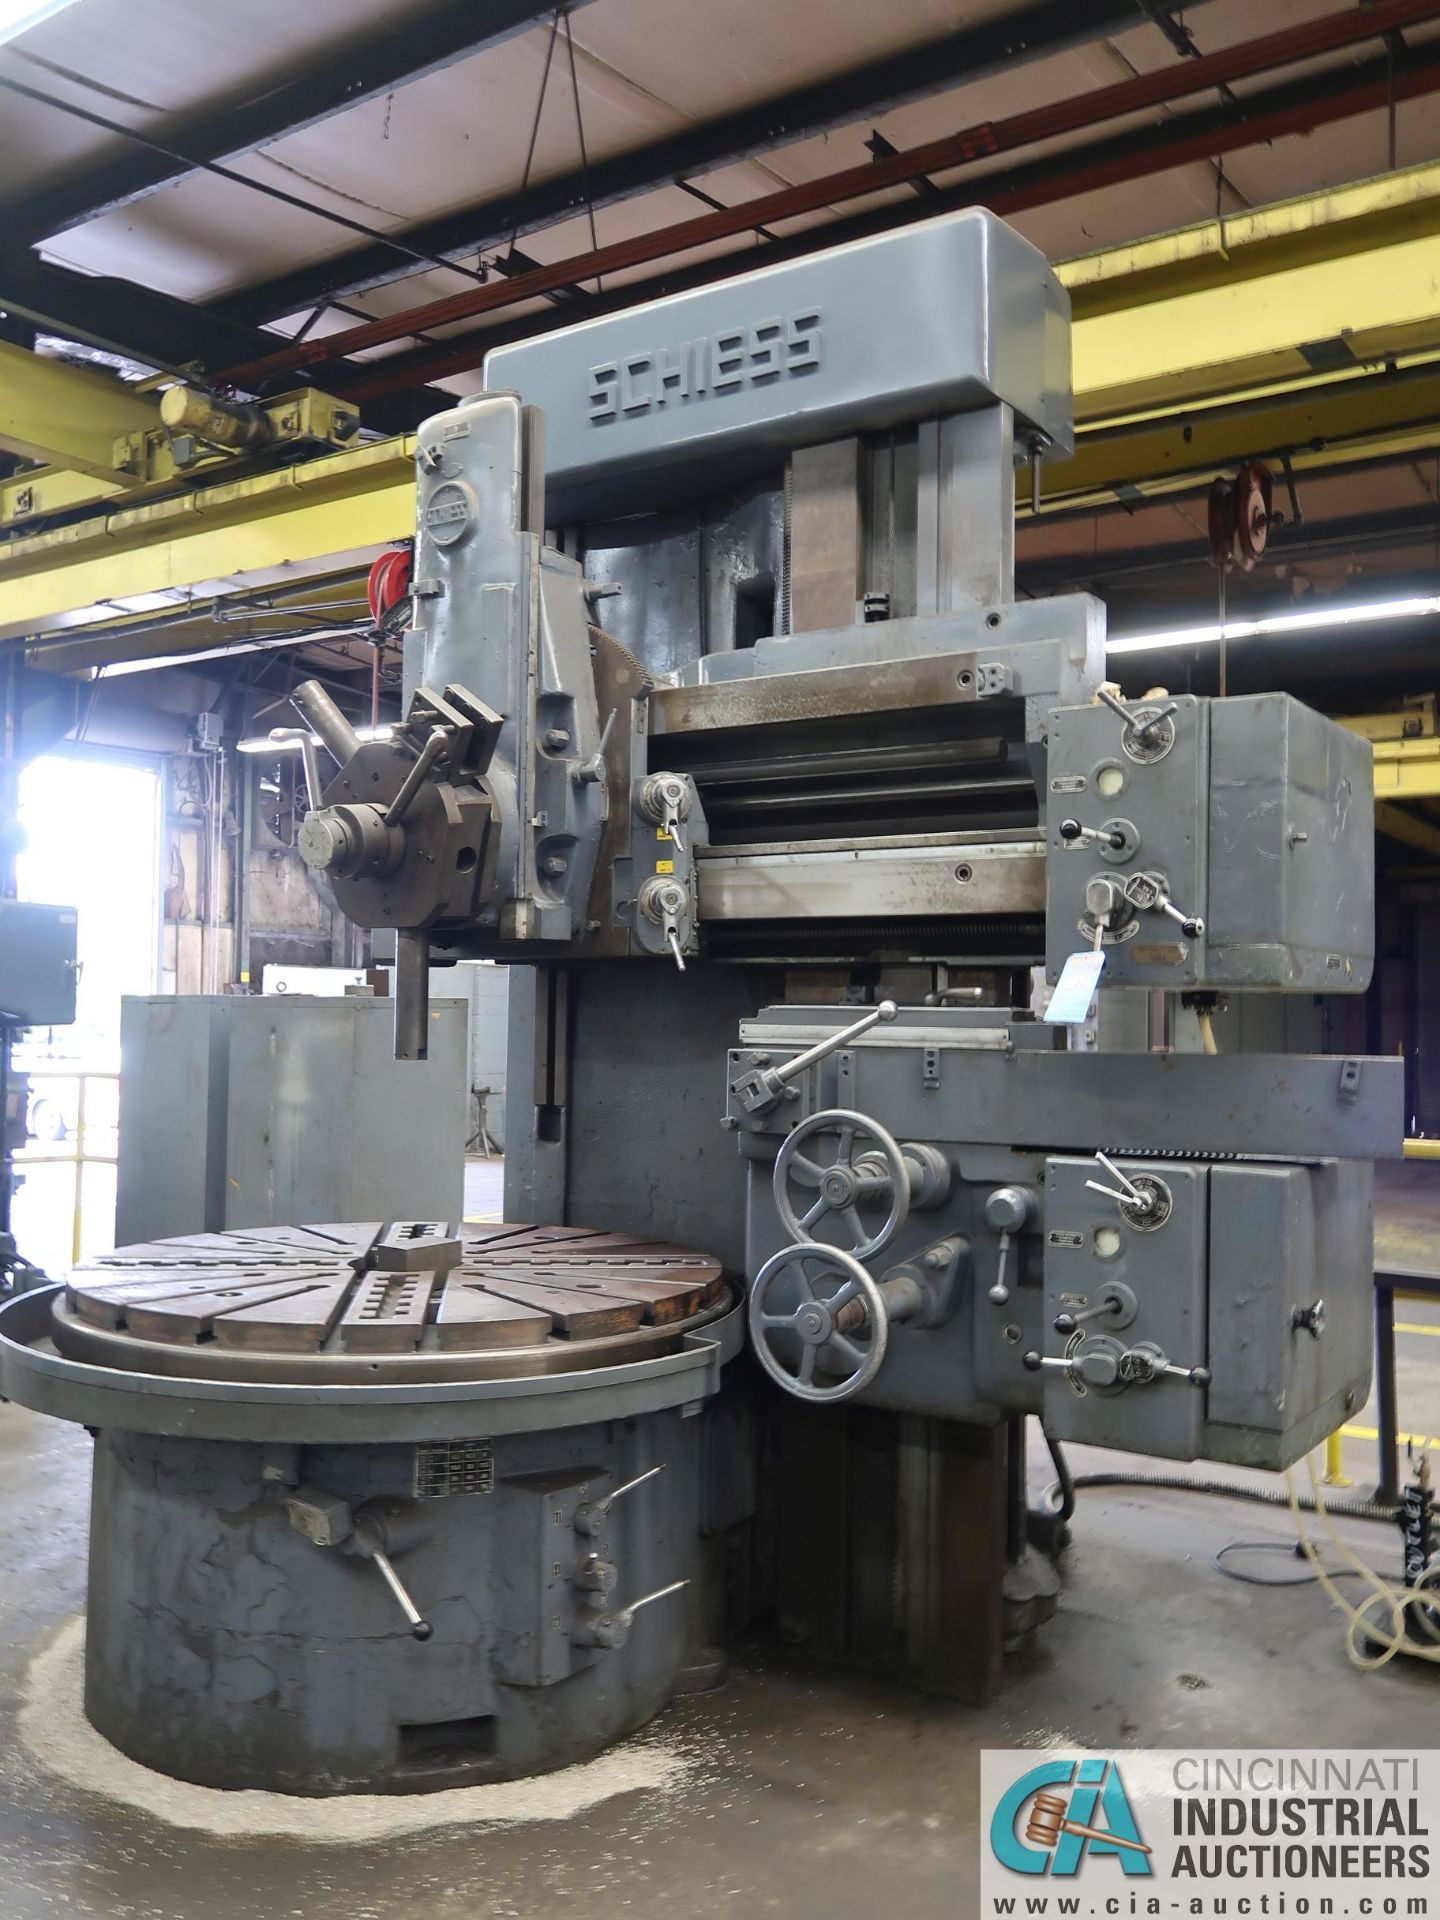 60" SCHIESS VERTICAL TURRET LATHE; S/N N/A, 5-POSITION TURRET - Image 12 of 12